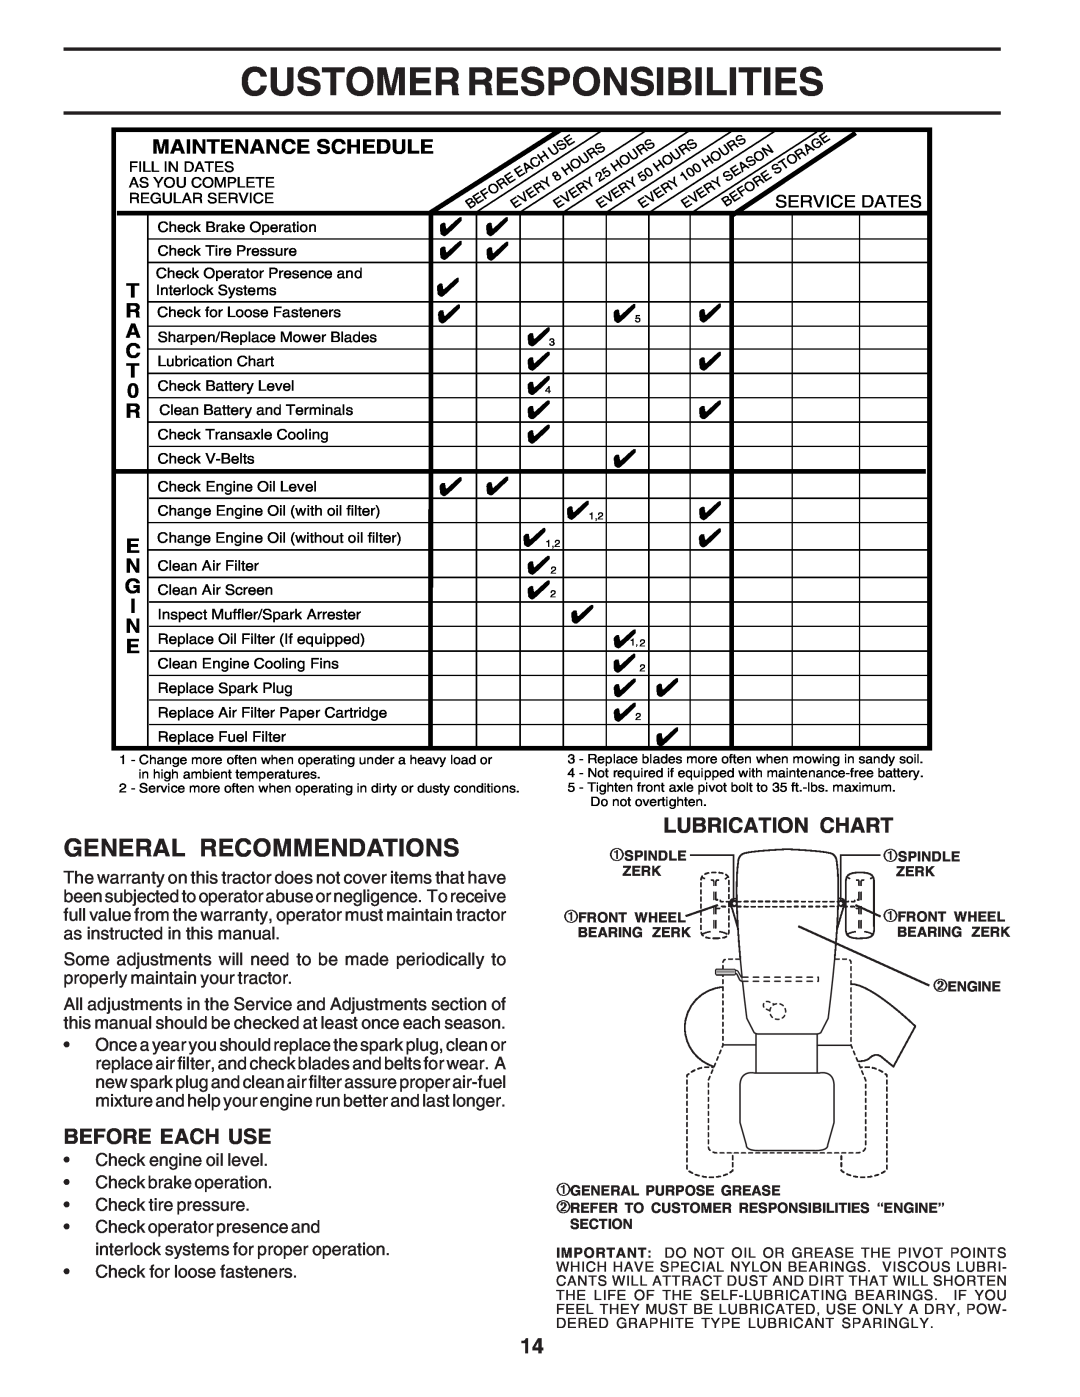 Weed Eater WE12538K manual Customer Responsibilities, General Recommendations, Before Each Use, Lubrication Chart 